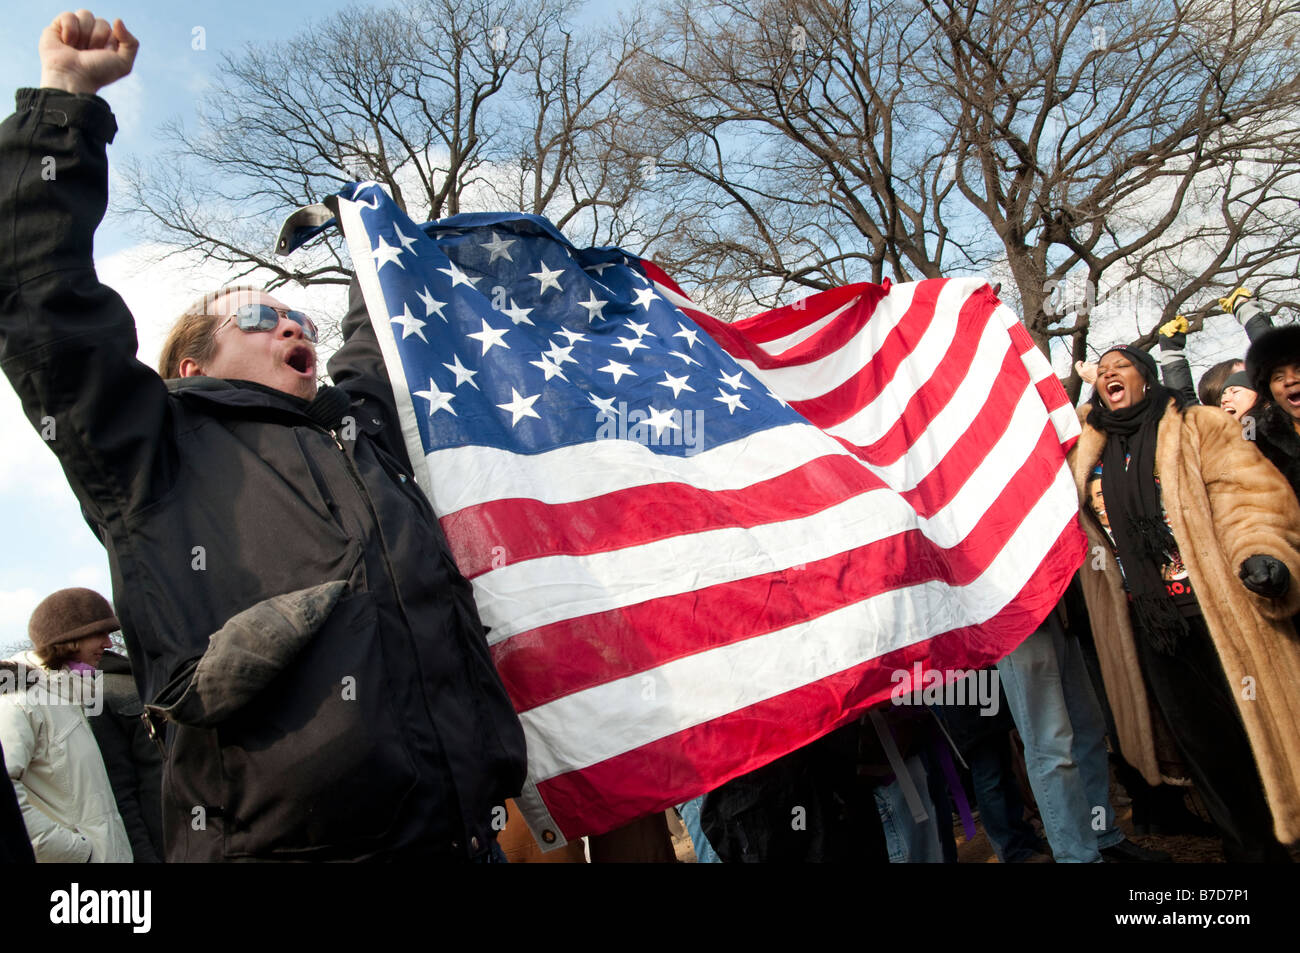 Daniel Saucedo of San Francisco and Yvette Jarvis of Athens, Greece, celebrate the Obama inauguration on the National Mall. Stock Photo